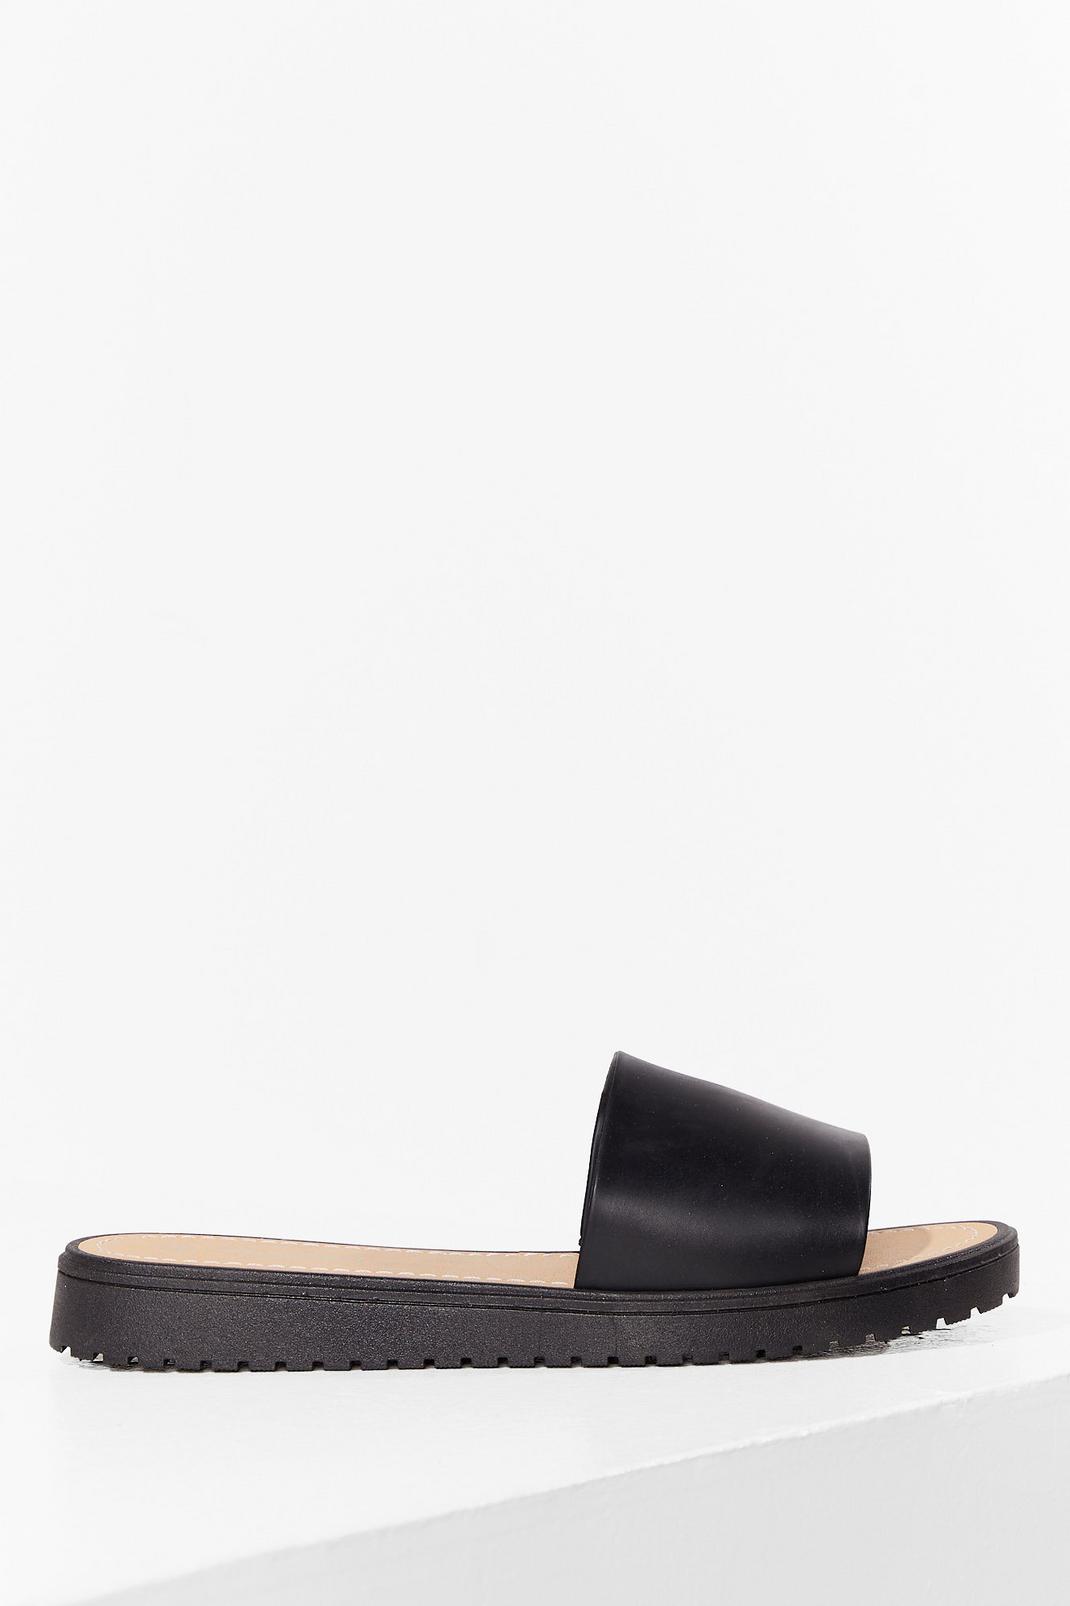 Who's Slide Are You On Faux Leather Sandals image number 1